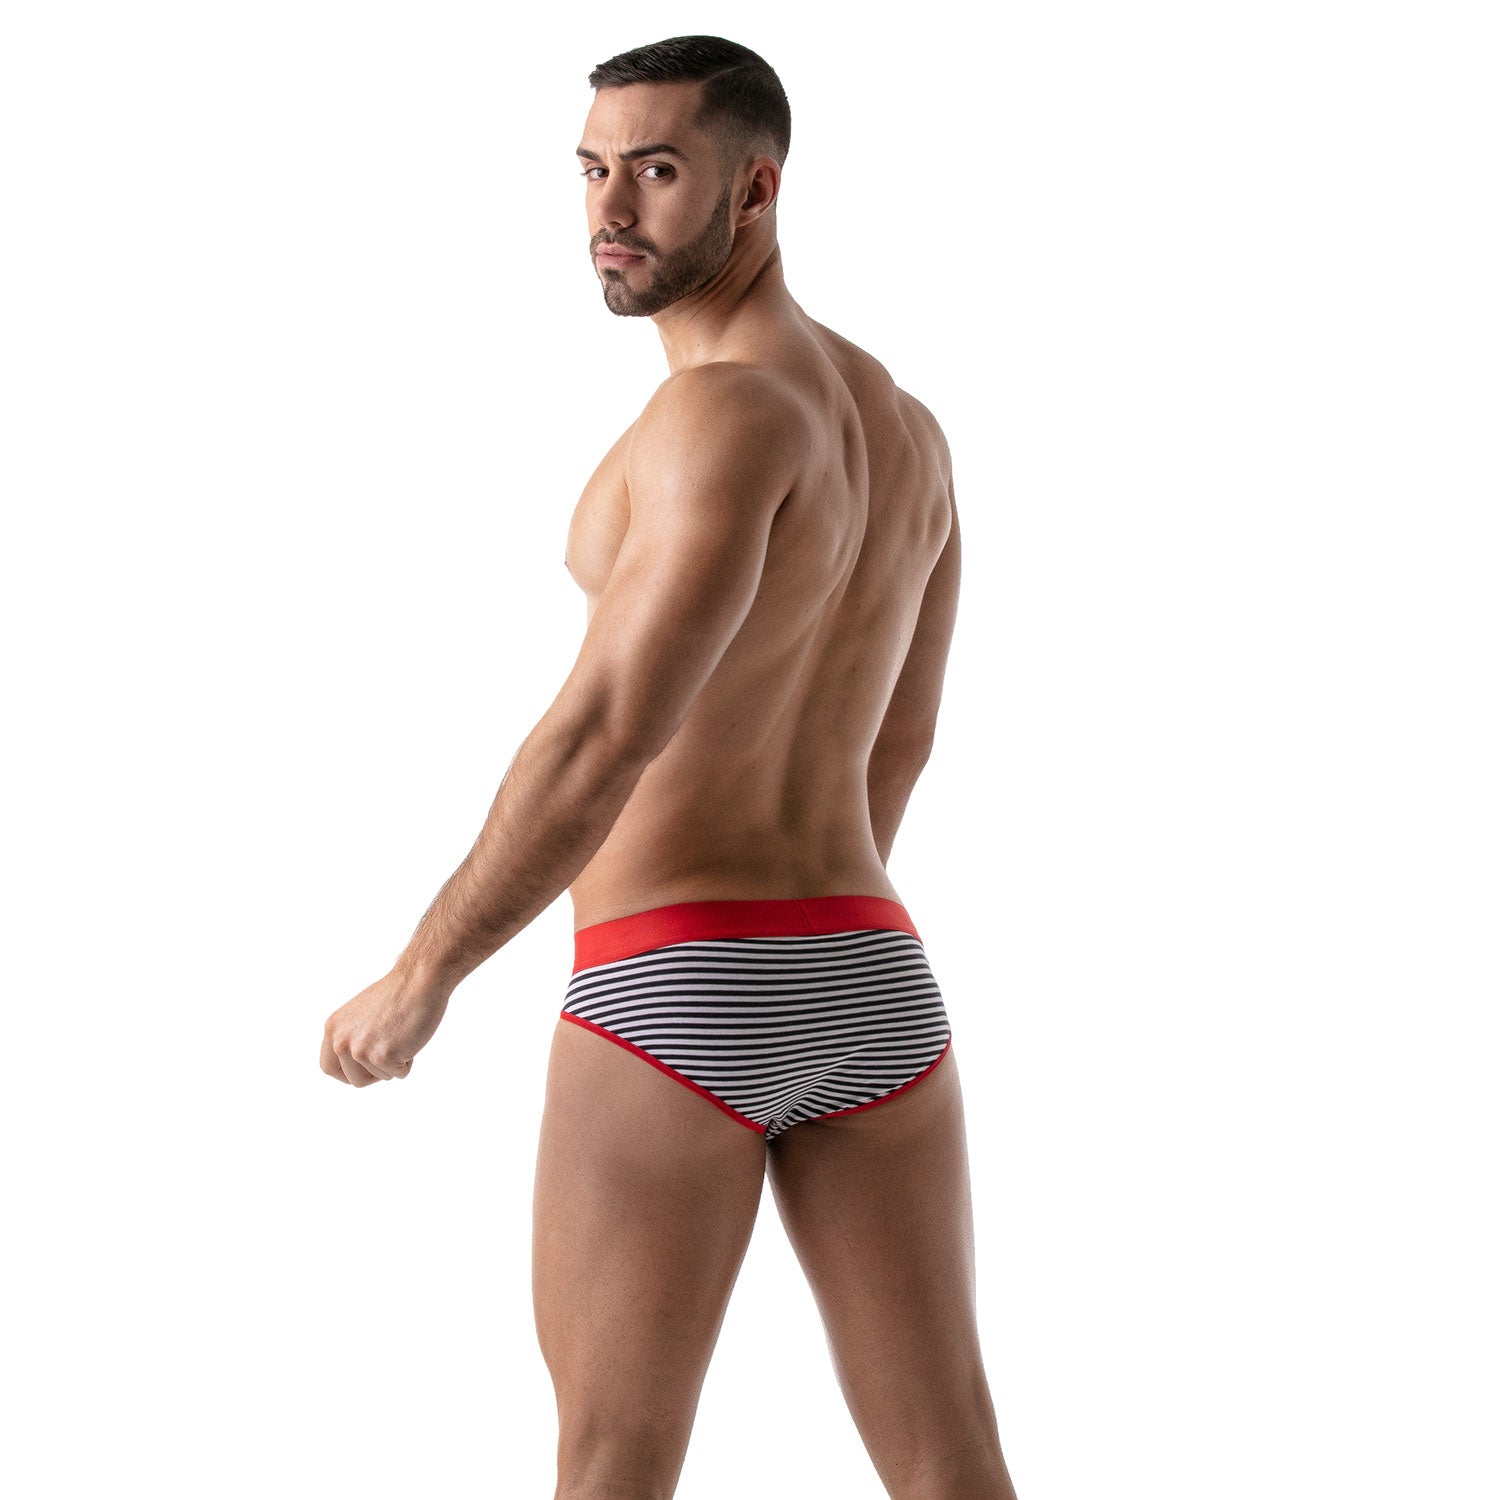 Stripes Push-Up Brief - Red/Navy